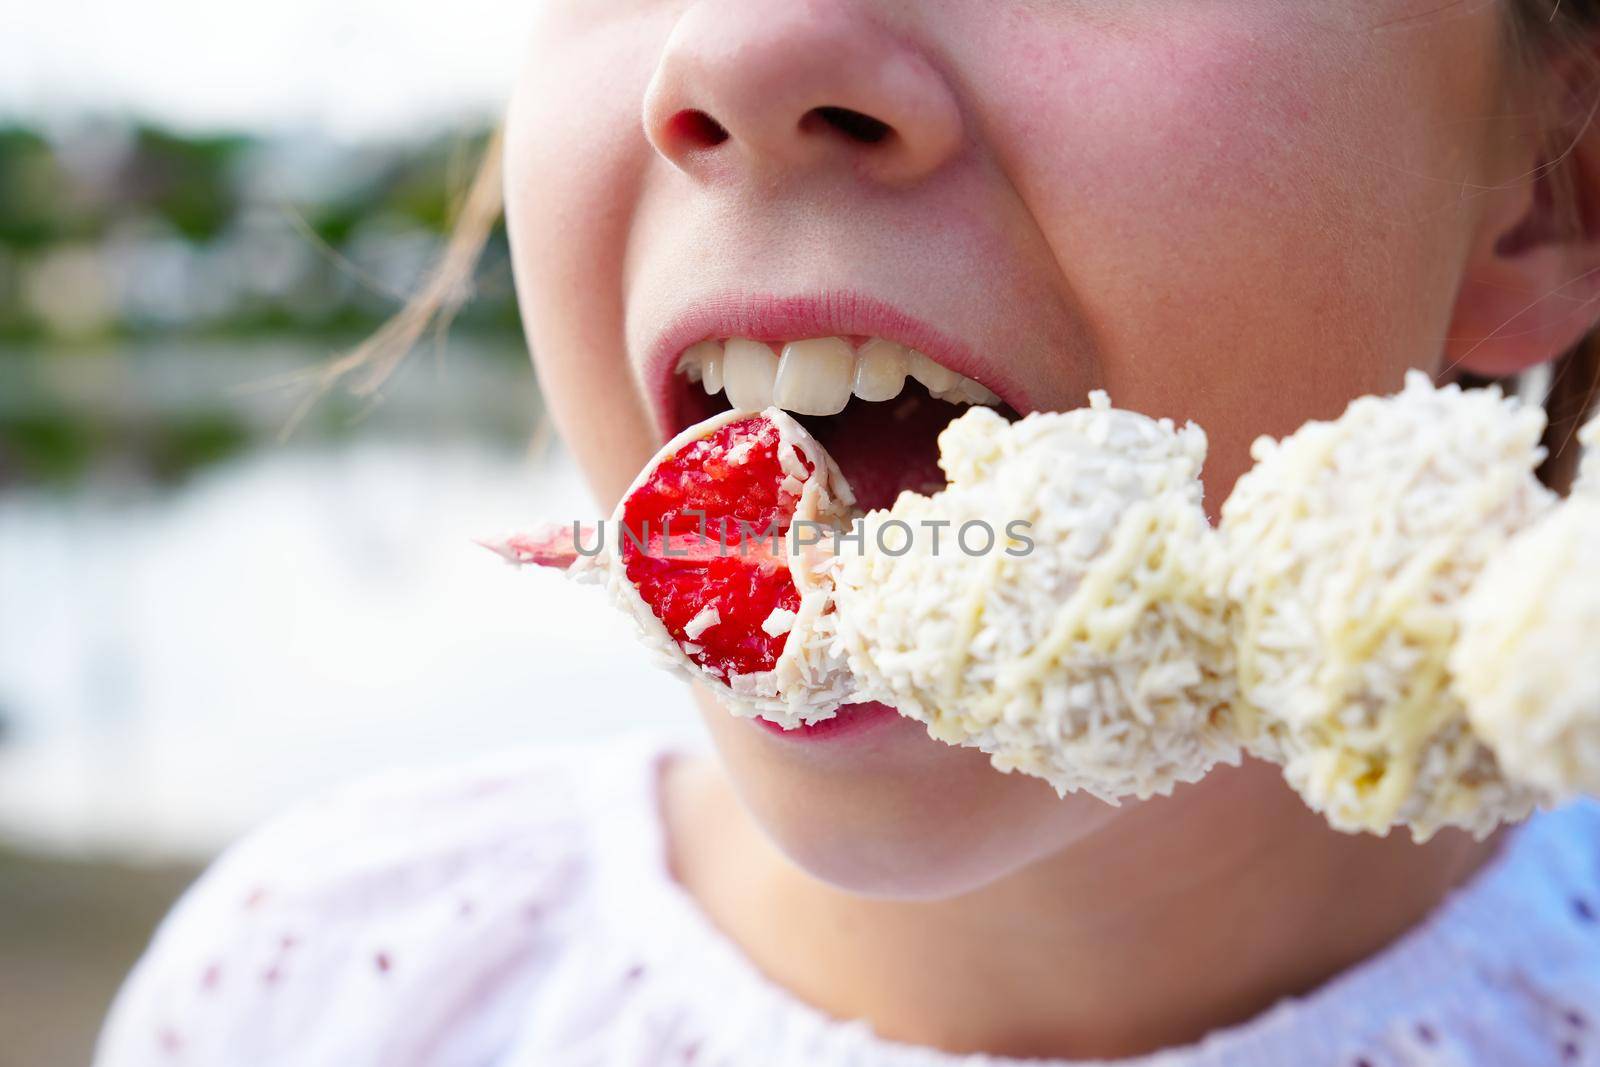 Beautiful girl eating a fresh red strawberry in white chocolate. strawberry white chocolate glaze